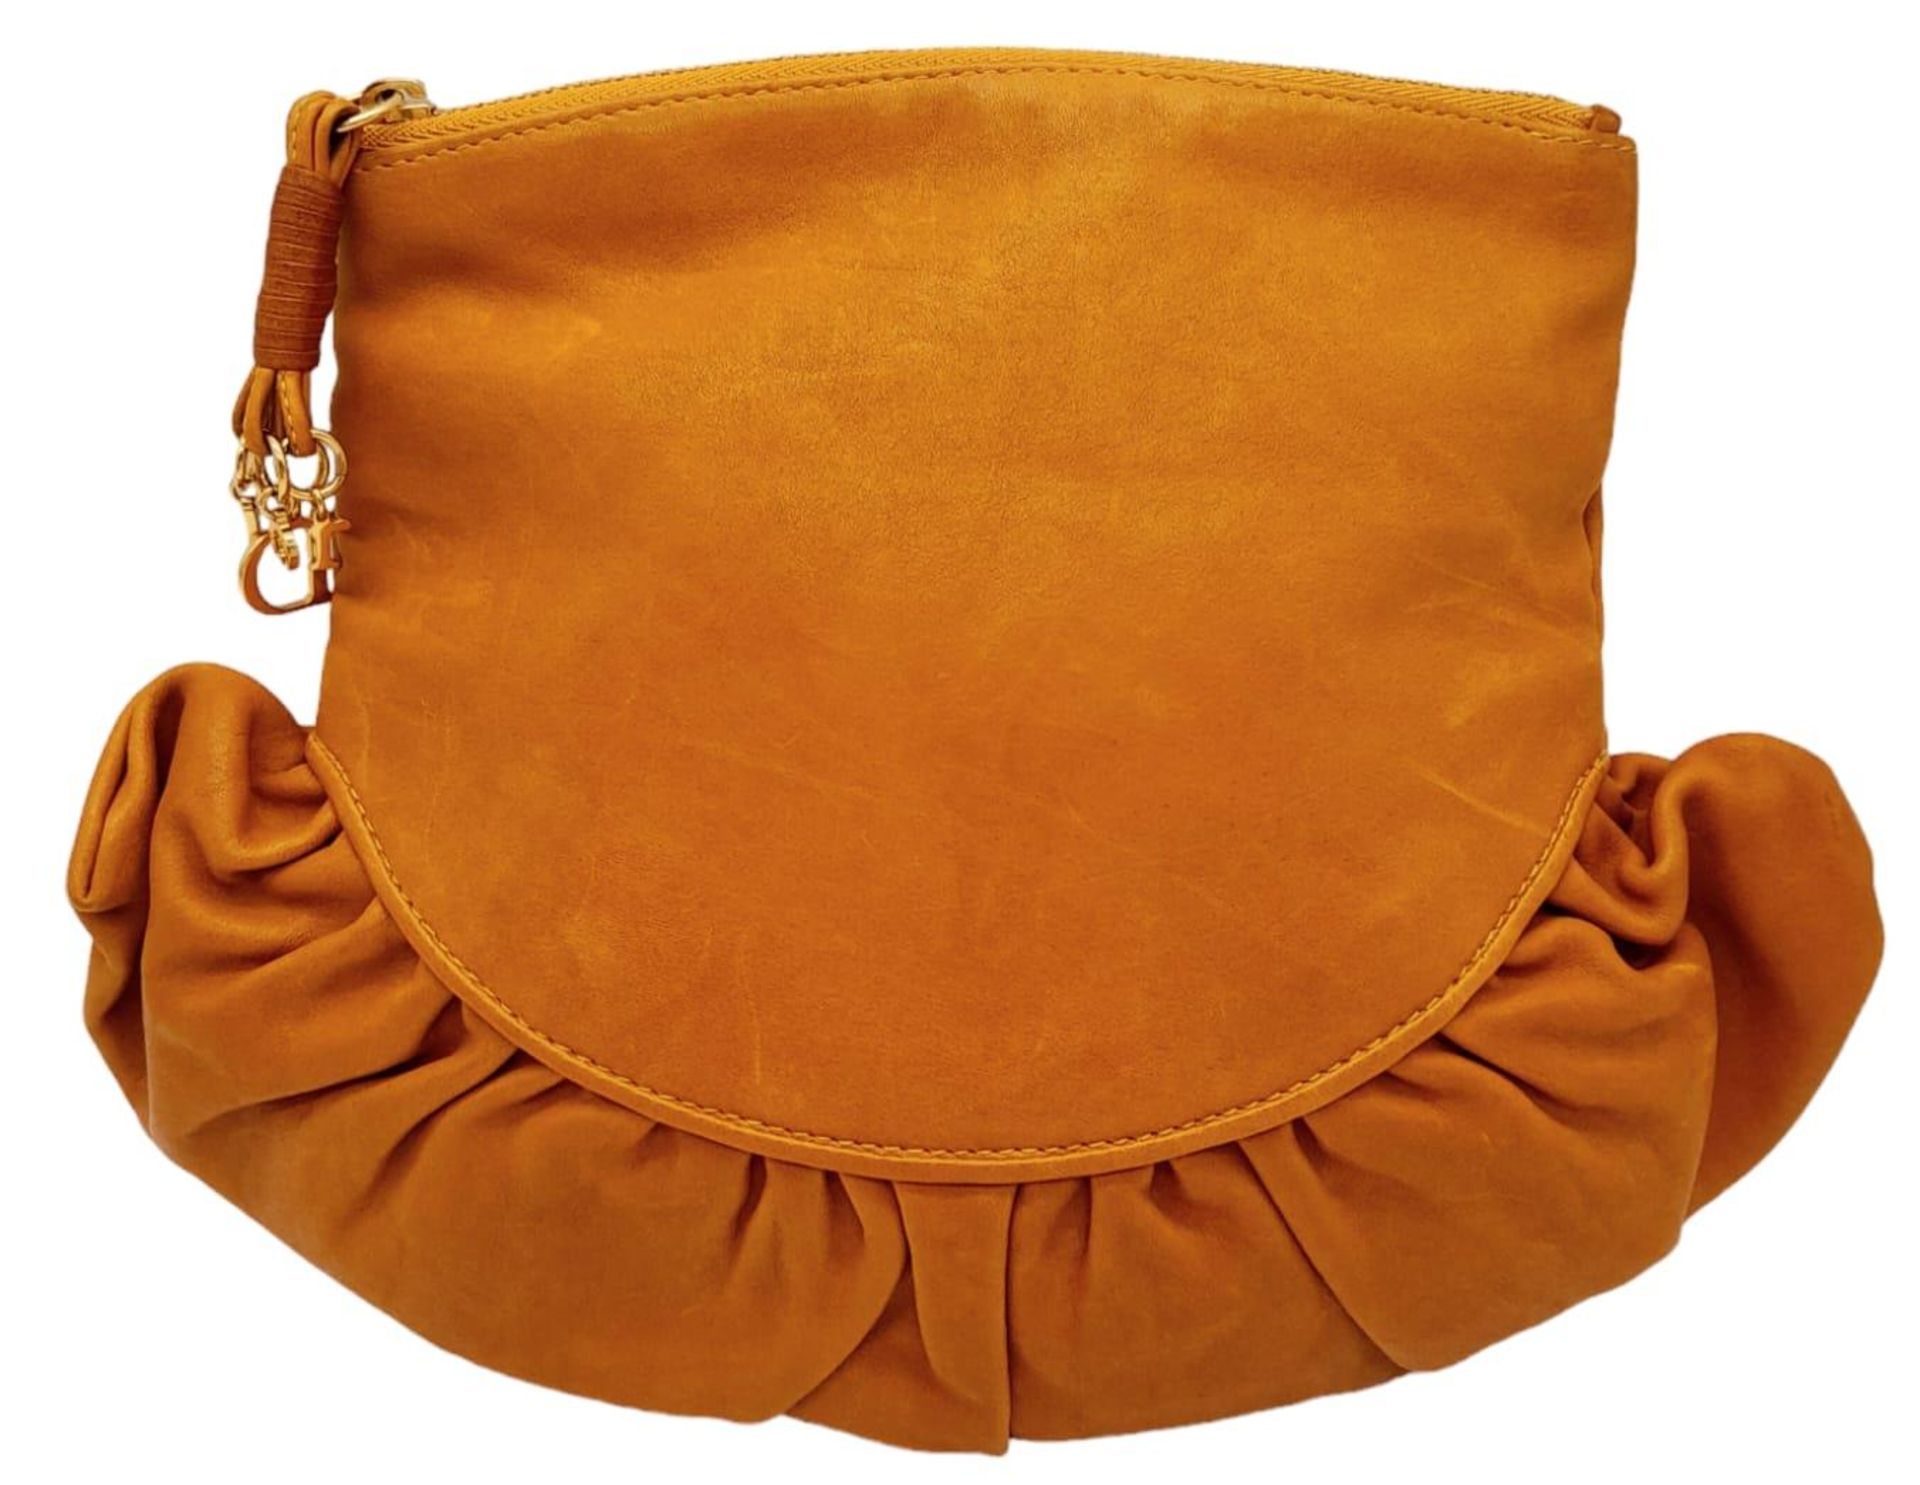 A Christian Dior Caramel Ruffled Clutch Bag. Leather exterior with gold-toned hardware and a